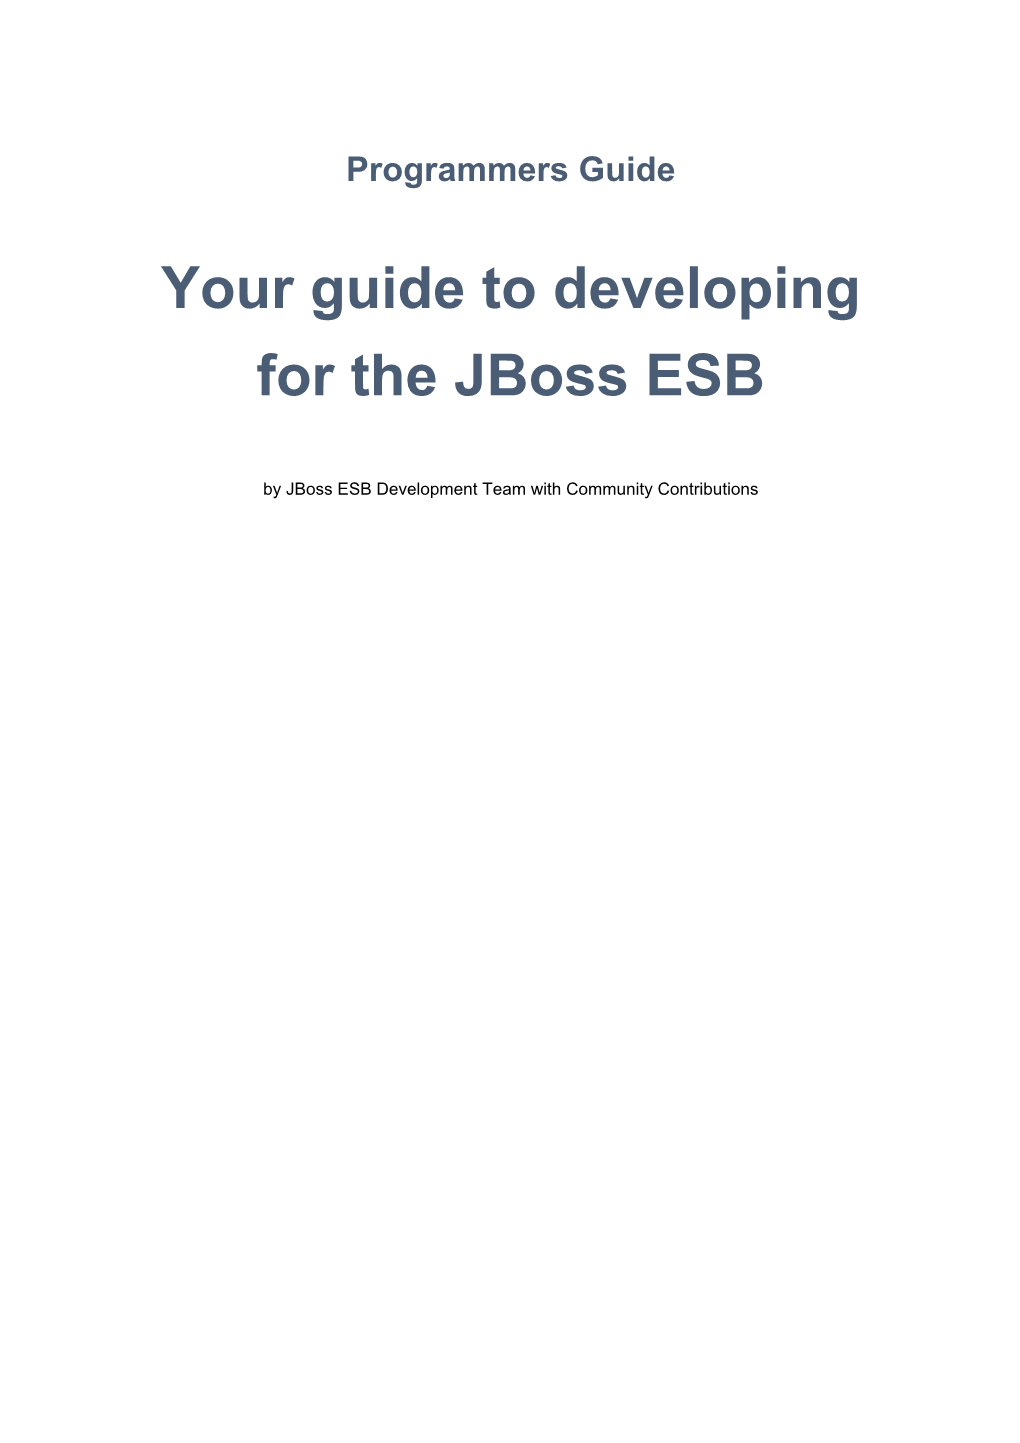 Your Guide to Developing for the Jboss ESB